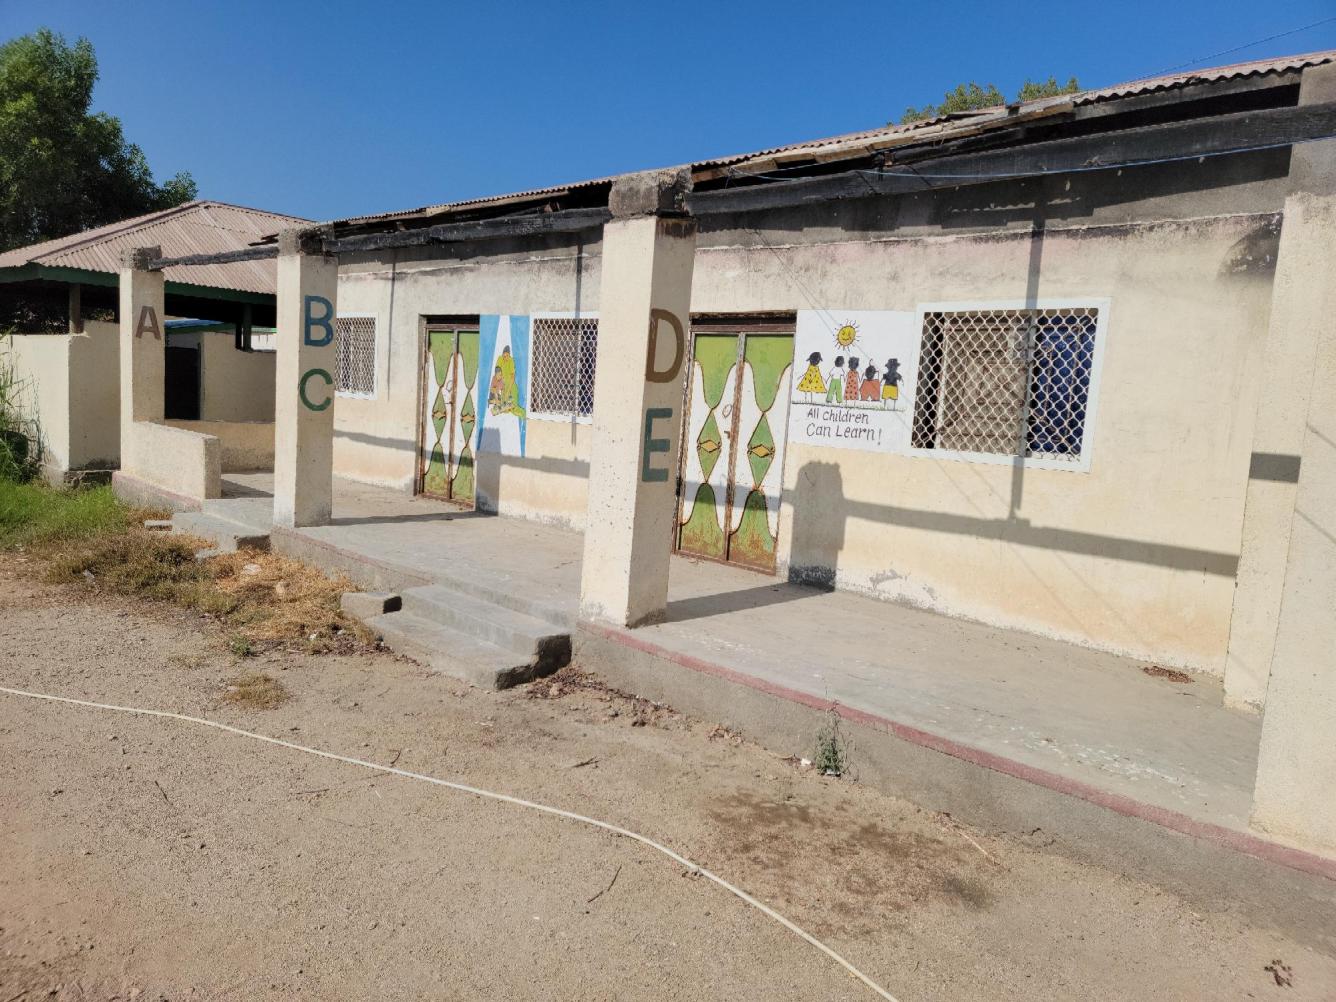 This special needs classroom at Omar Bin Khatab Lower Primary School in Berbera, Somaliland caught fire in 2018 and had to be abandoned. The children were integrated into mainstream classrooms. 